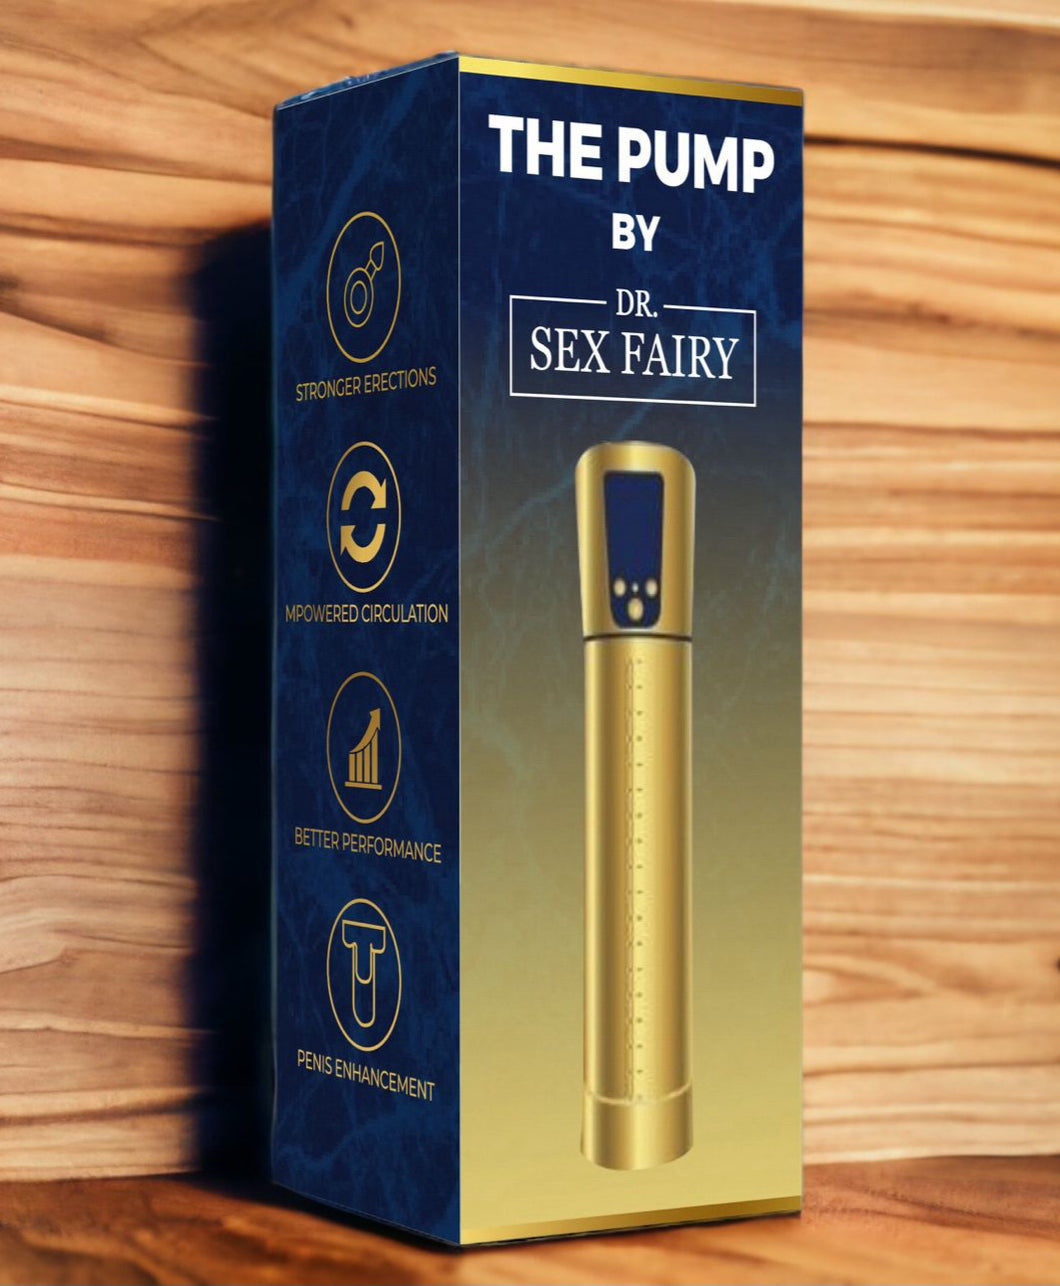 The Pump by Dr. Sex Fairy